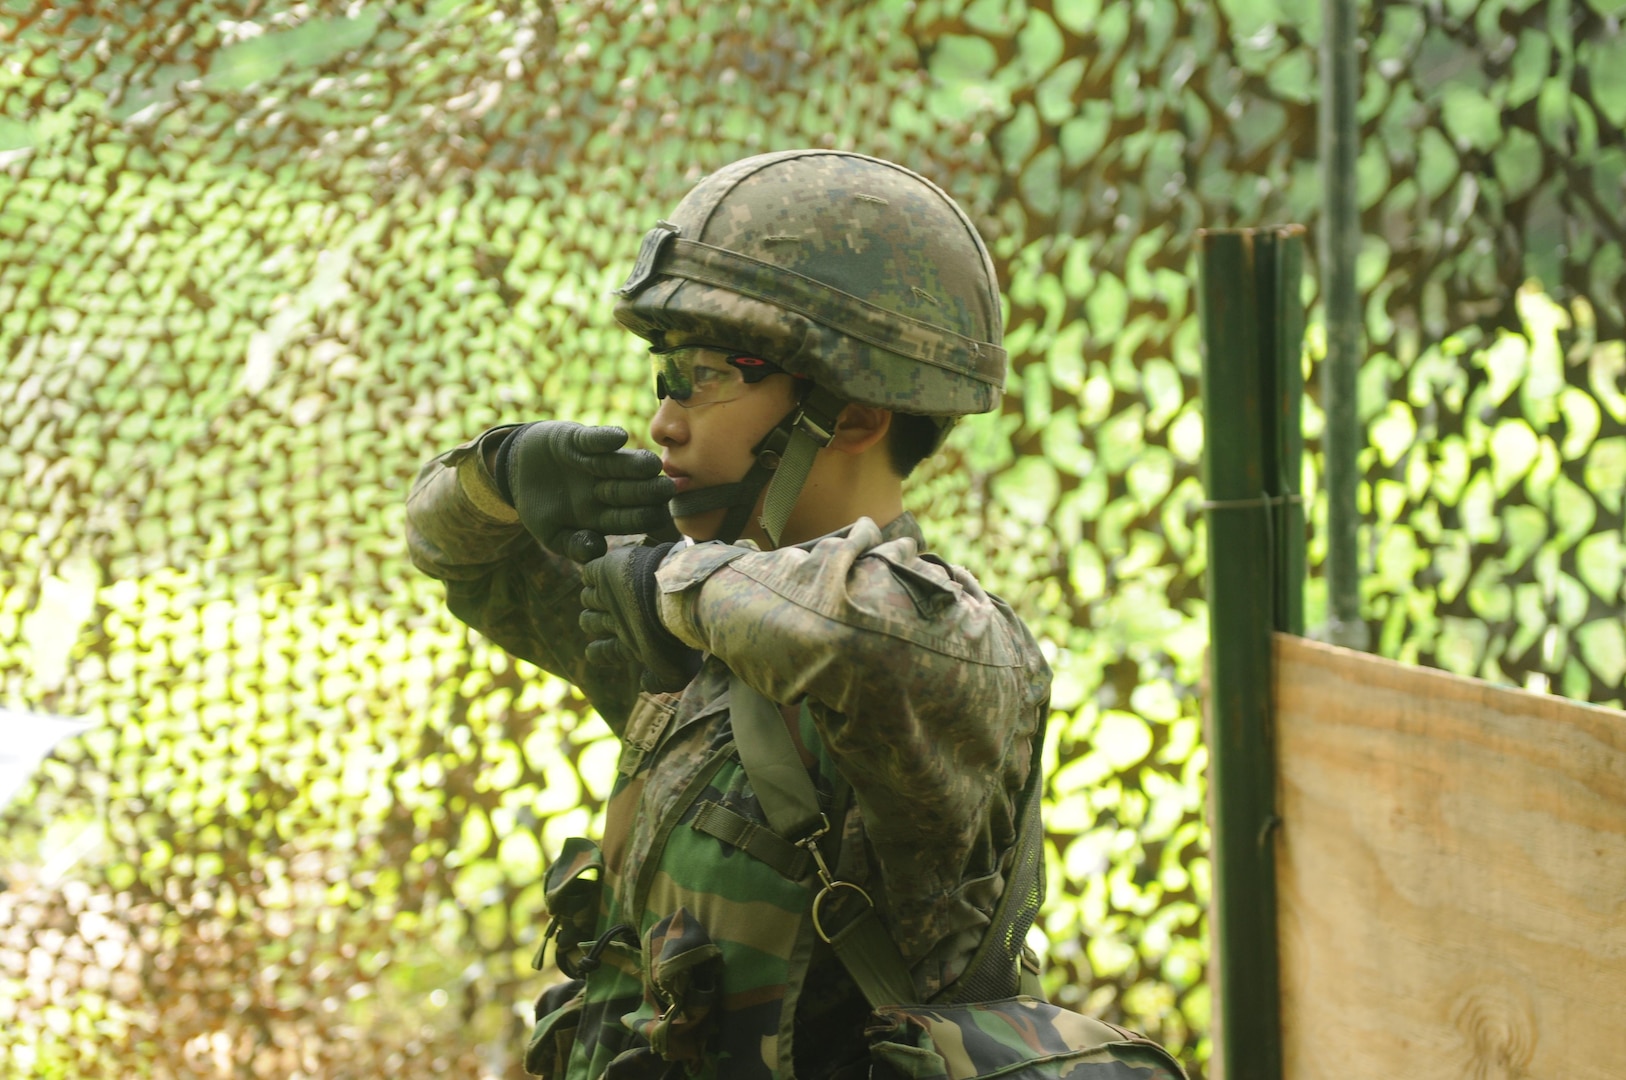 1st Lt. Jung Ji Eun - an infantryman and a Seoul native - 2nd Company, 115th Mechanized Infantry Battalion, 90th Mech. Inf. Brigade, 30th Mech. Inf. Division performs hand signals during the patrol lane to earn the U.S. Expert Infantry Badge, on Camp Casey, South Korea, May 26. Jung is the first female ROKA officer to earn to U.S. EIB. (U.S. Army photos by Mr. Pak, Chin-U, 2nd Infantry Division/ROK-U.S. Combined Division Public Affairs Office)